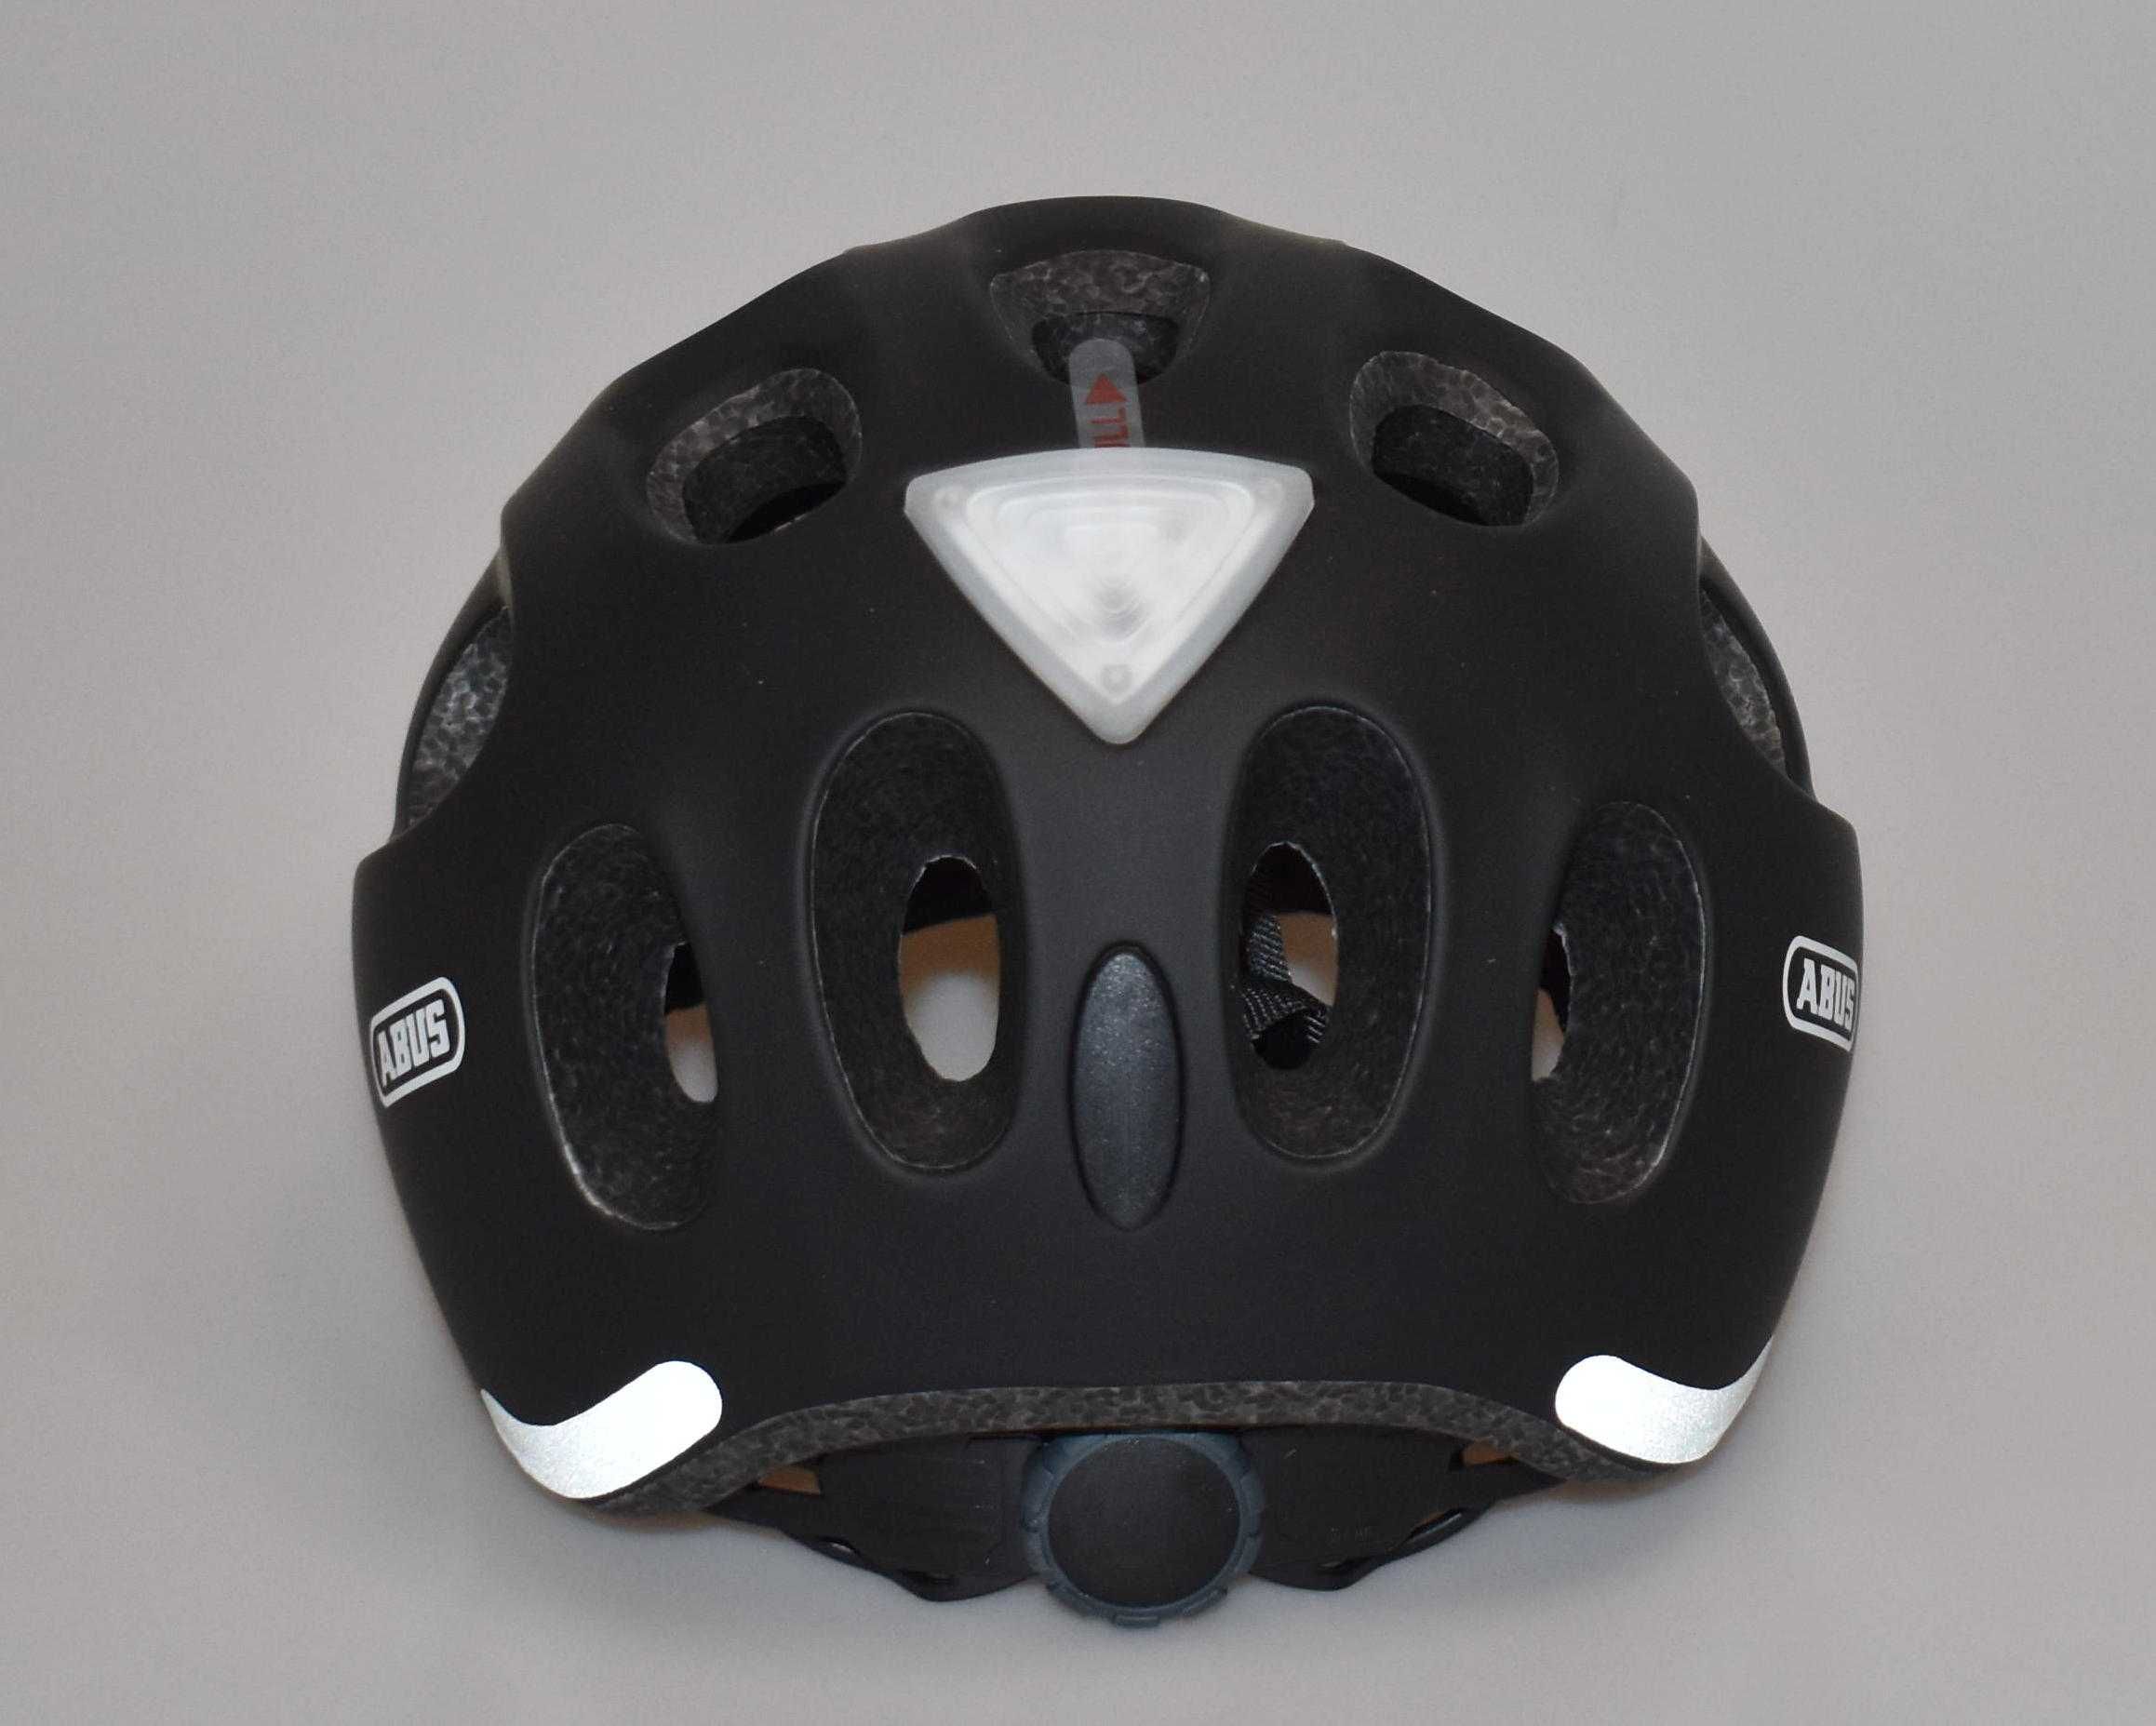 Kask rowerowy Abus Youn-I Ace r. M 52-57